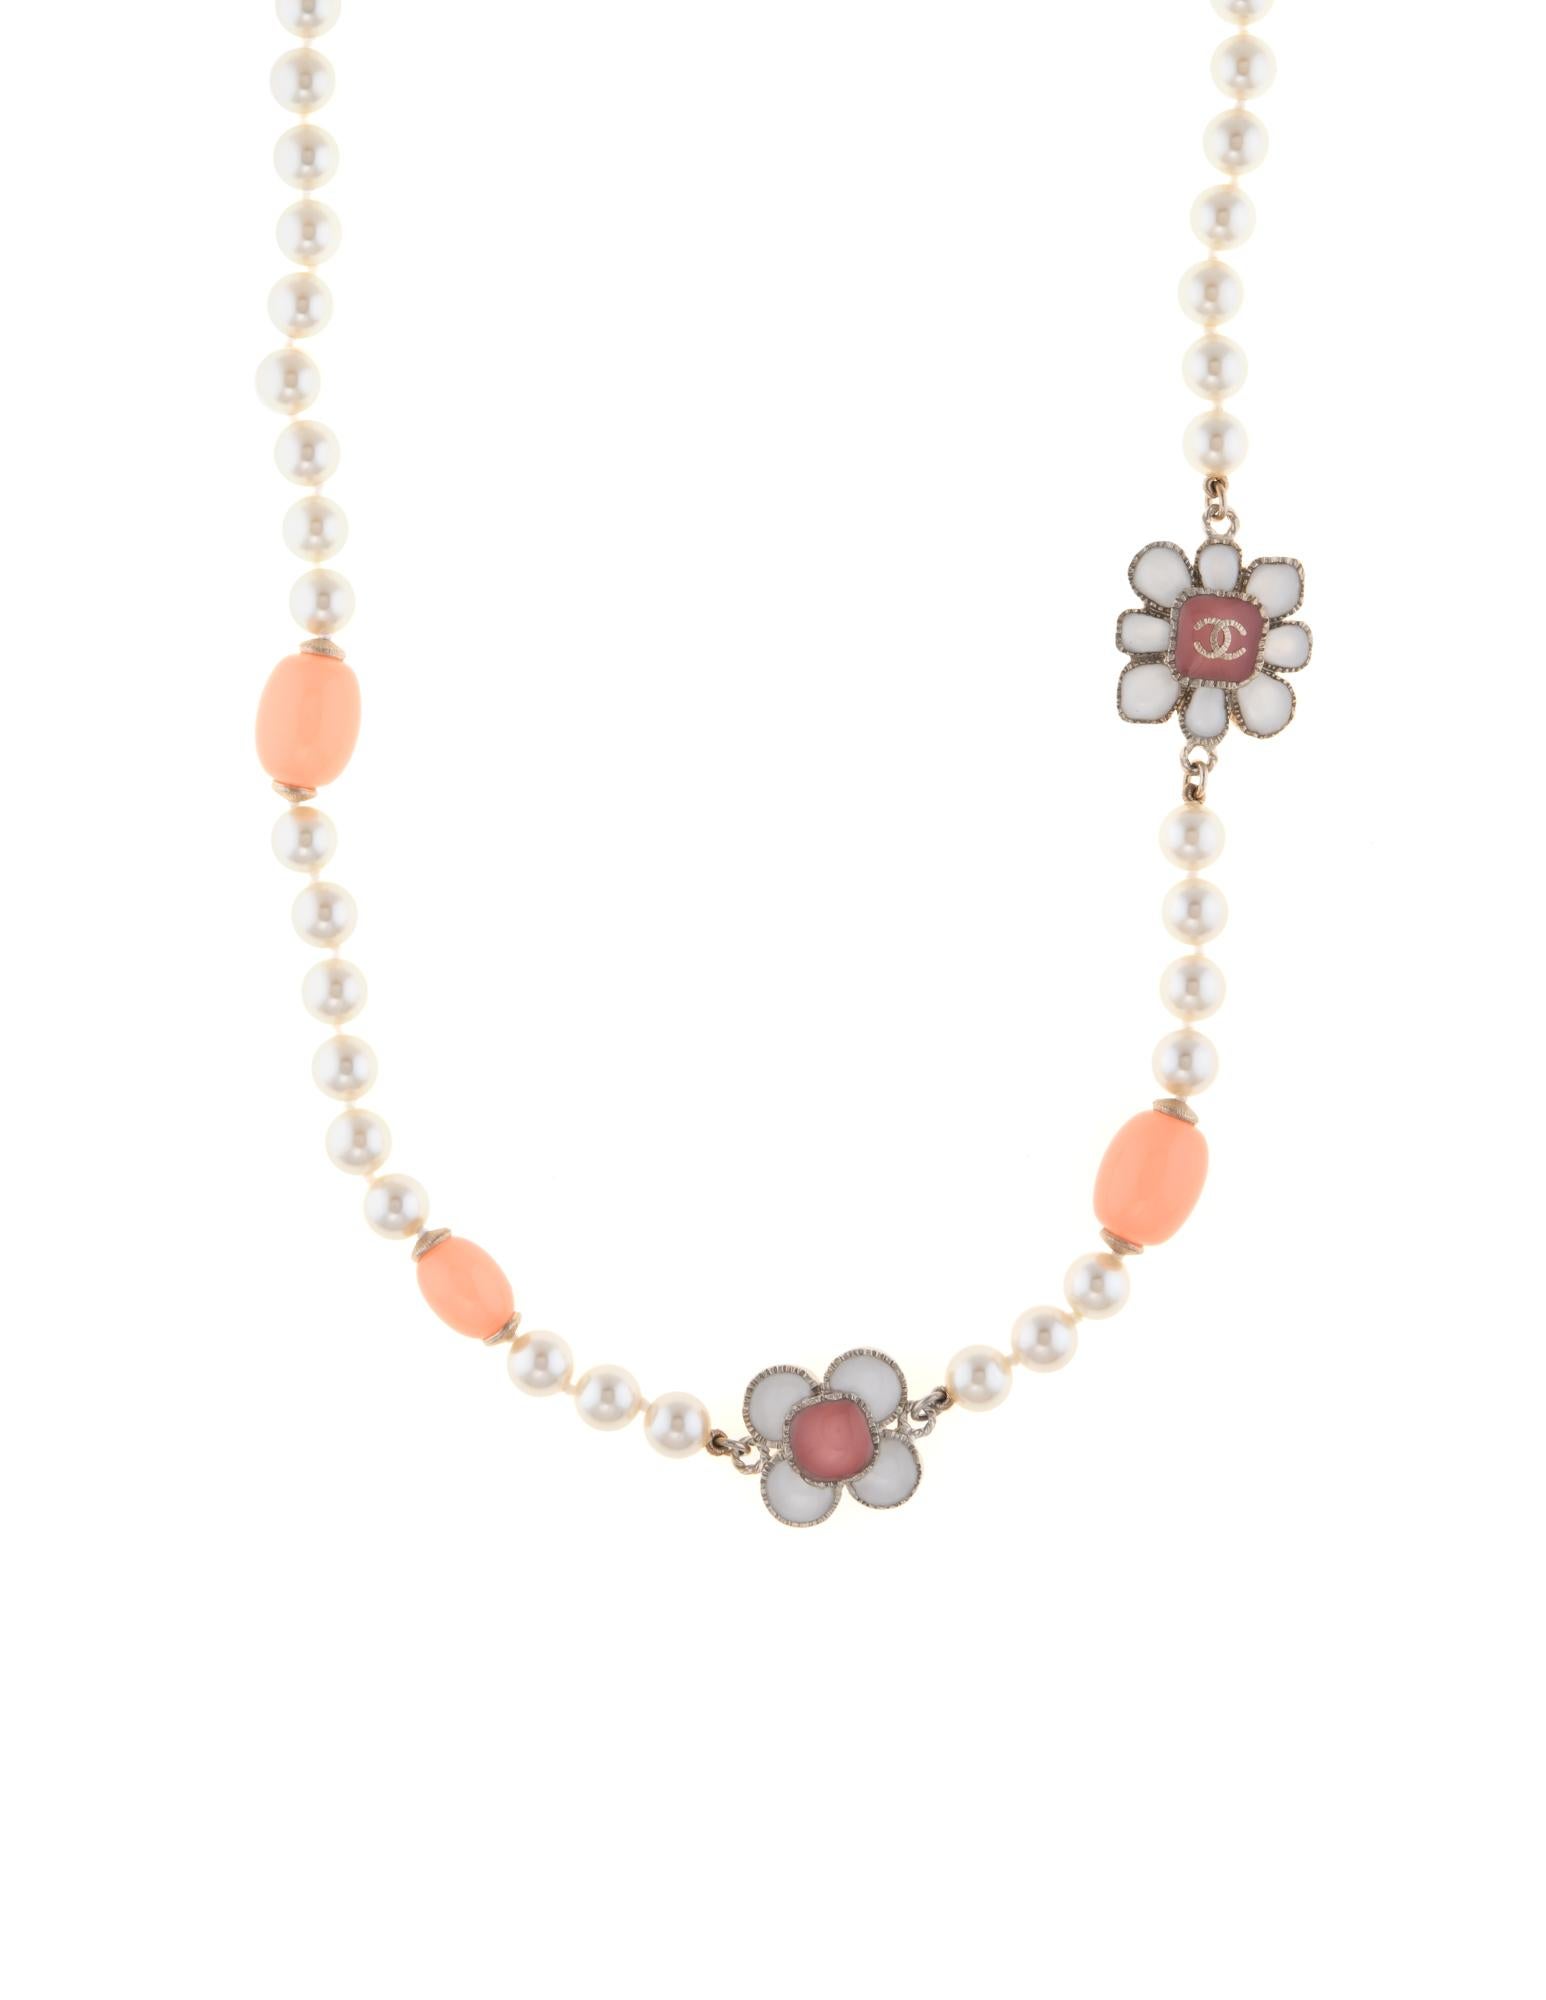 Stylish Chanel faux pearl flower necklace crafted in light yellow gold tone, circa 2016 

Faux pearls are uniform in size and measure 8mm. The pearls are individually knotted for added security. Peach hued separator beads measure 15mm x 12.5mm. The